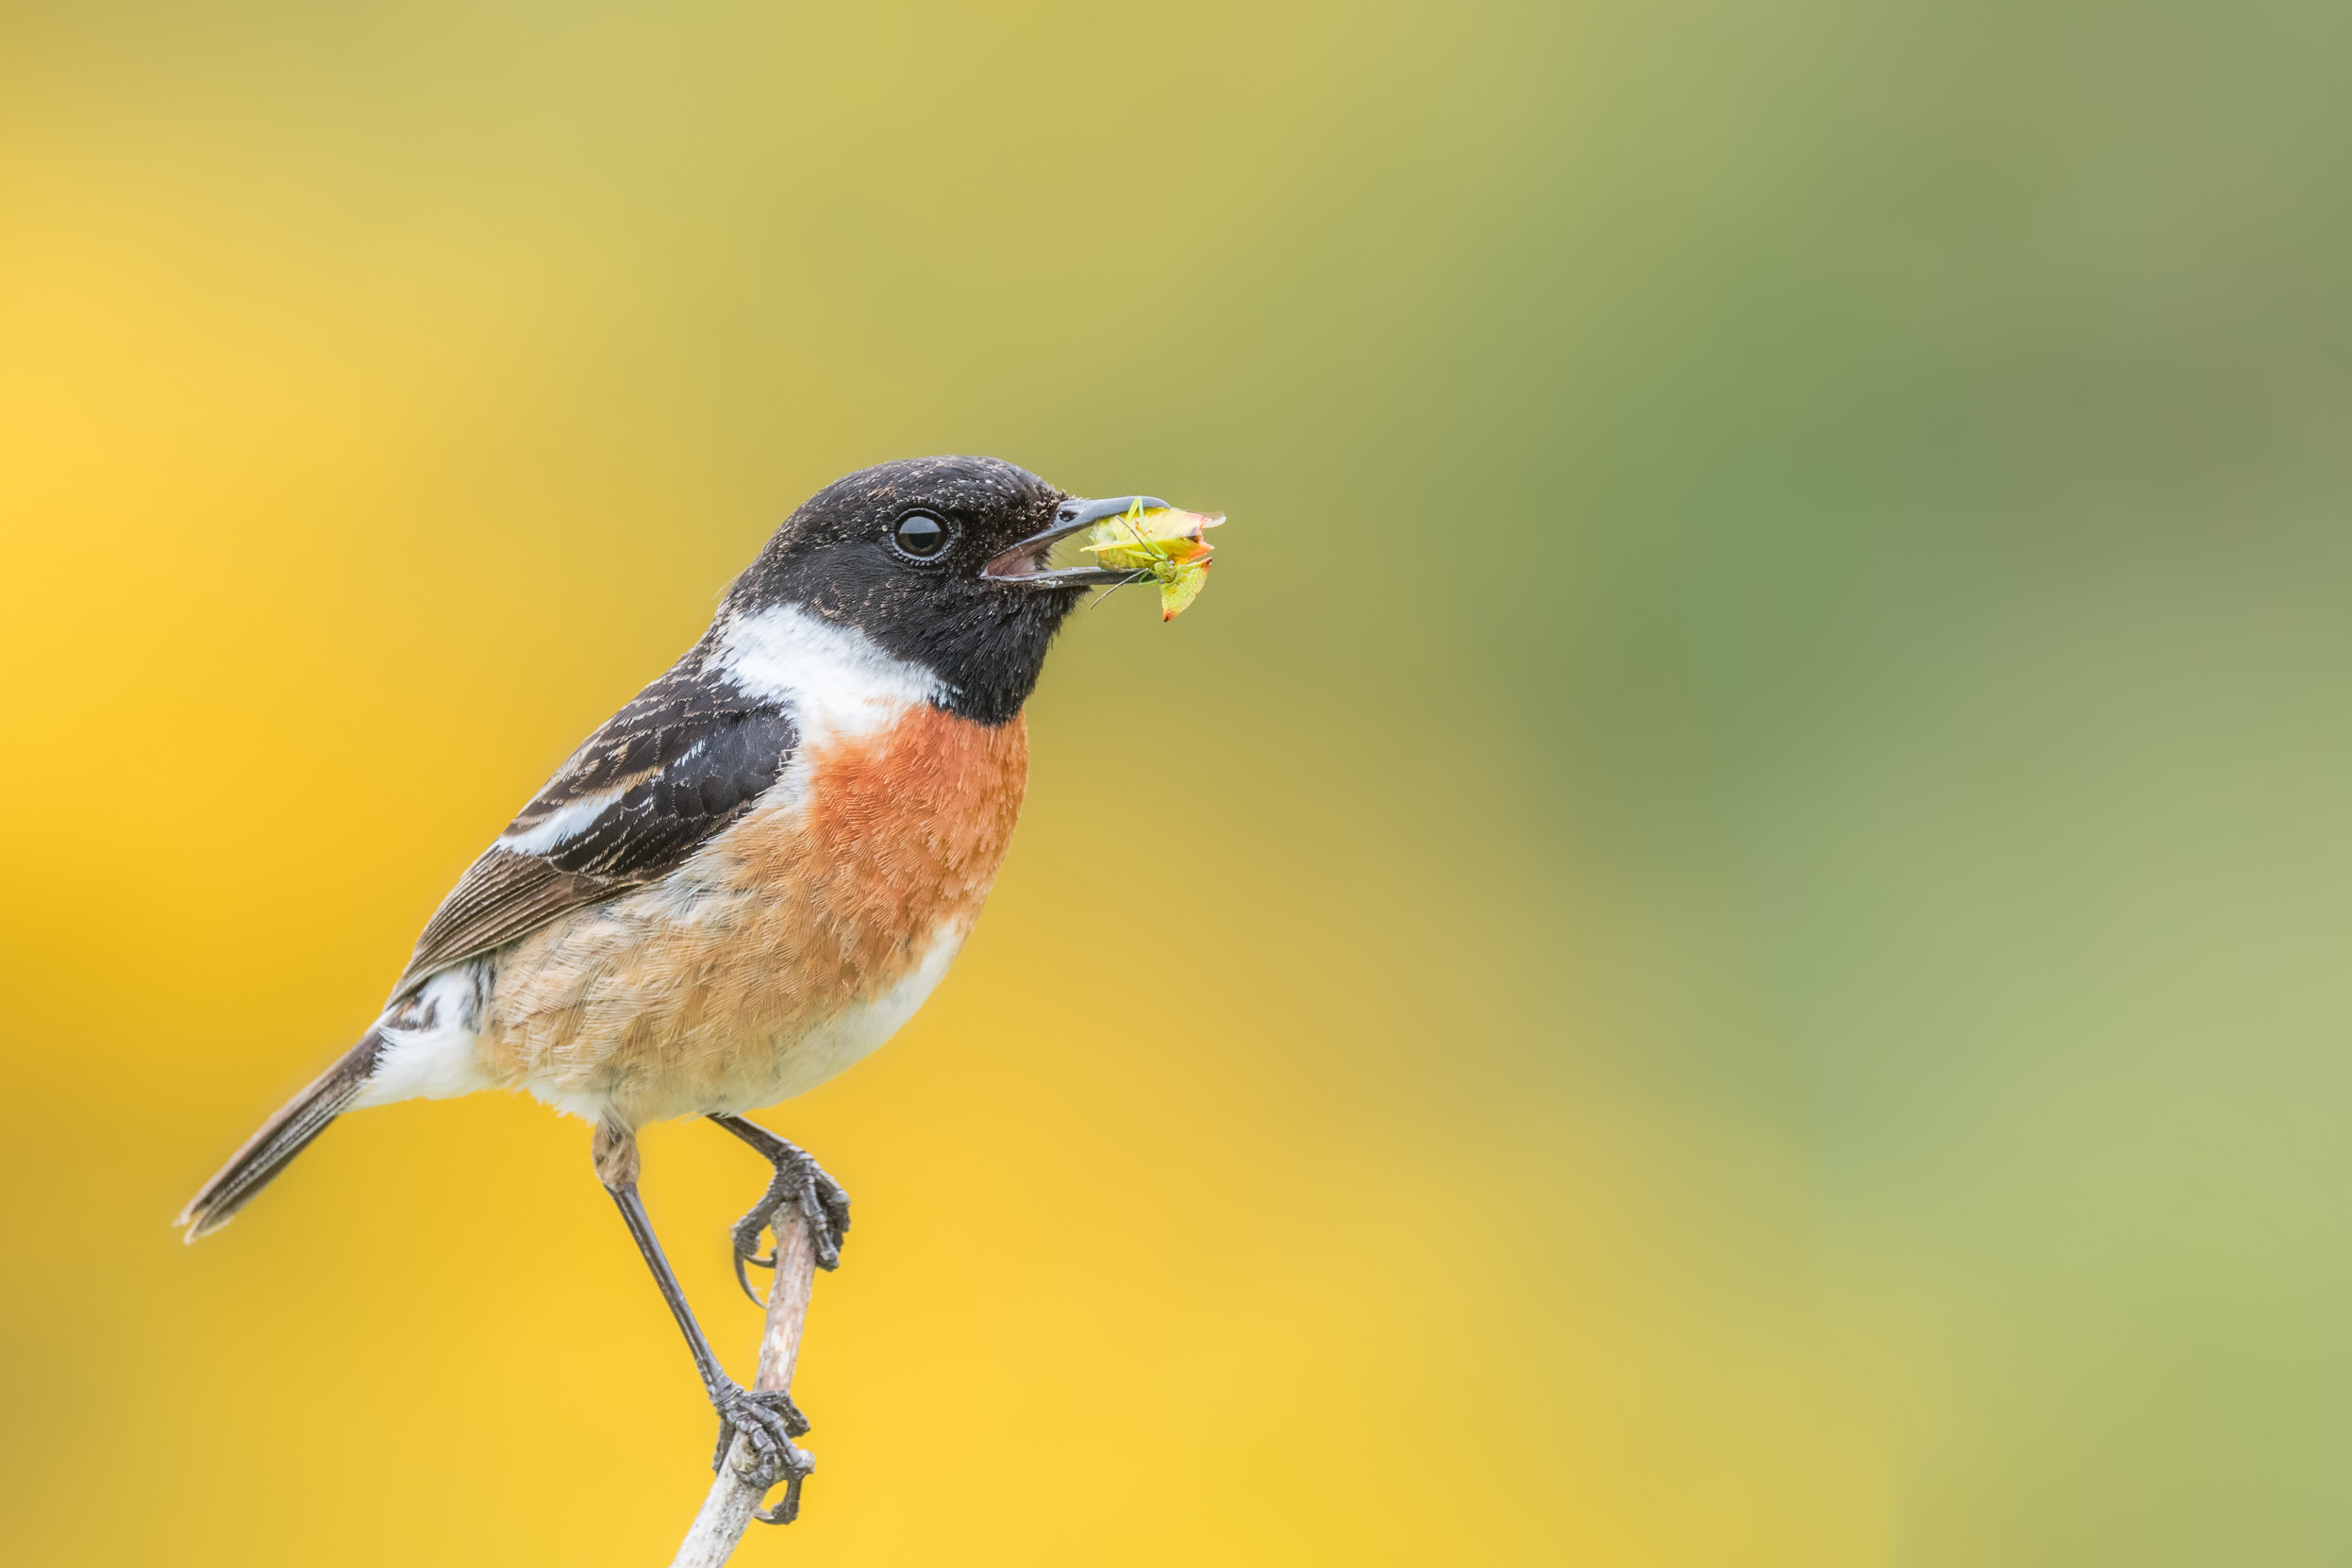 A lone male Stonechat perched on a branch eating a grub.